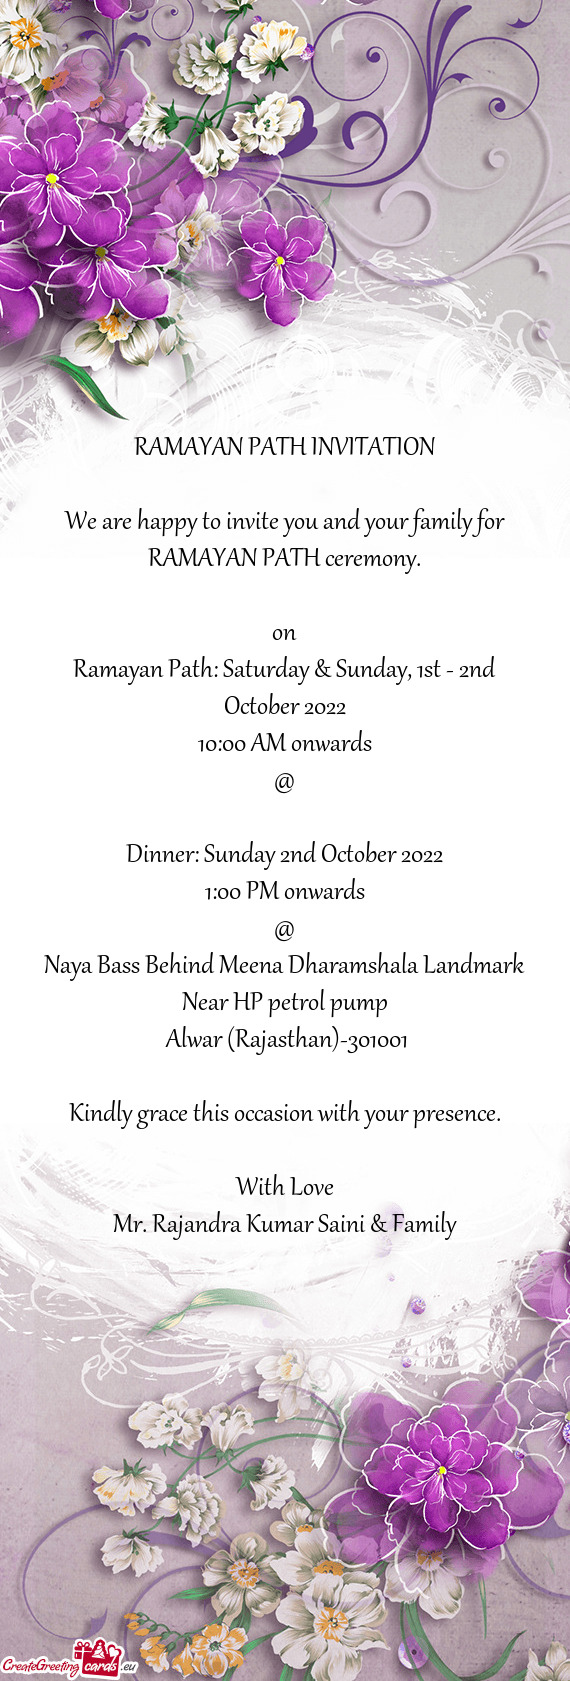 We are happy to invite you and your family for RAMAYAN PATH ceremony